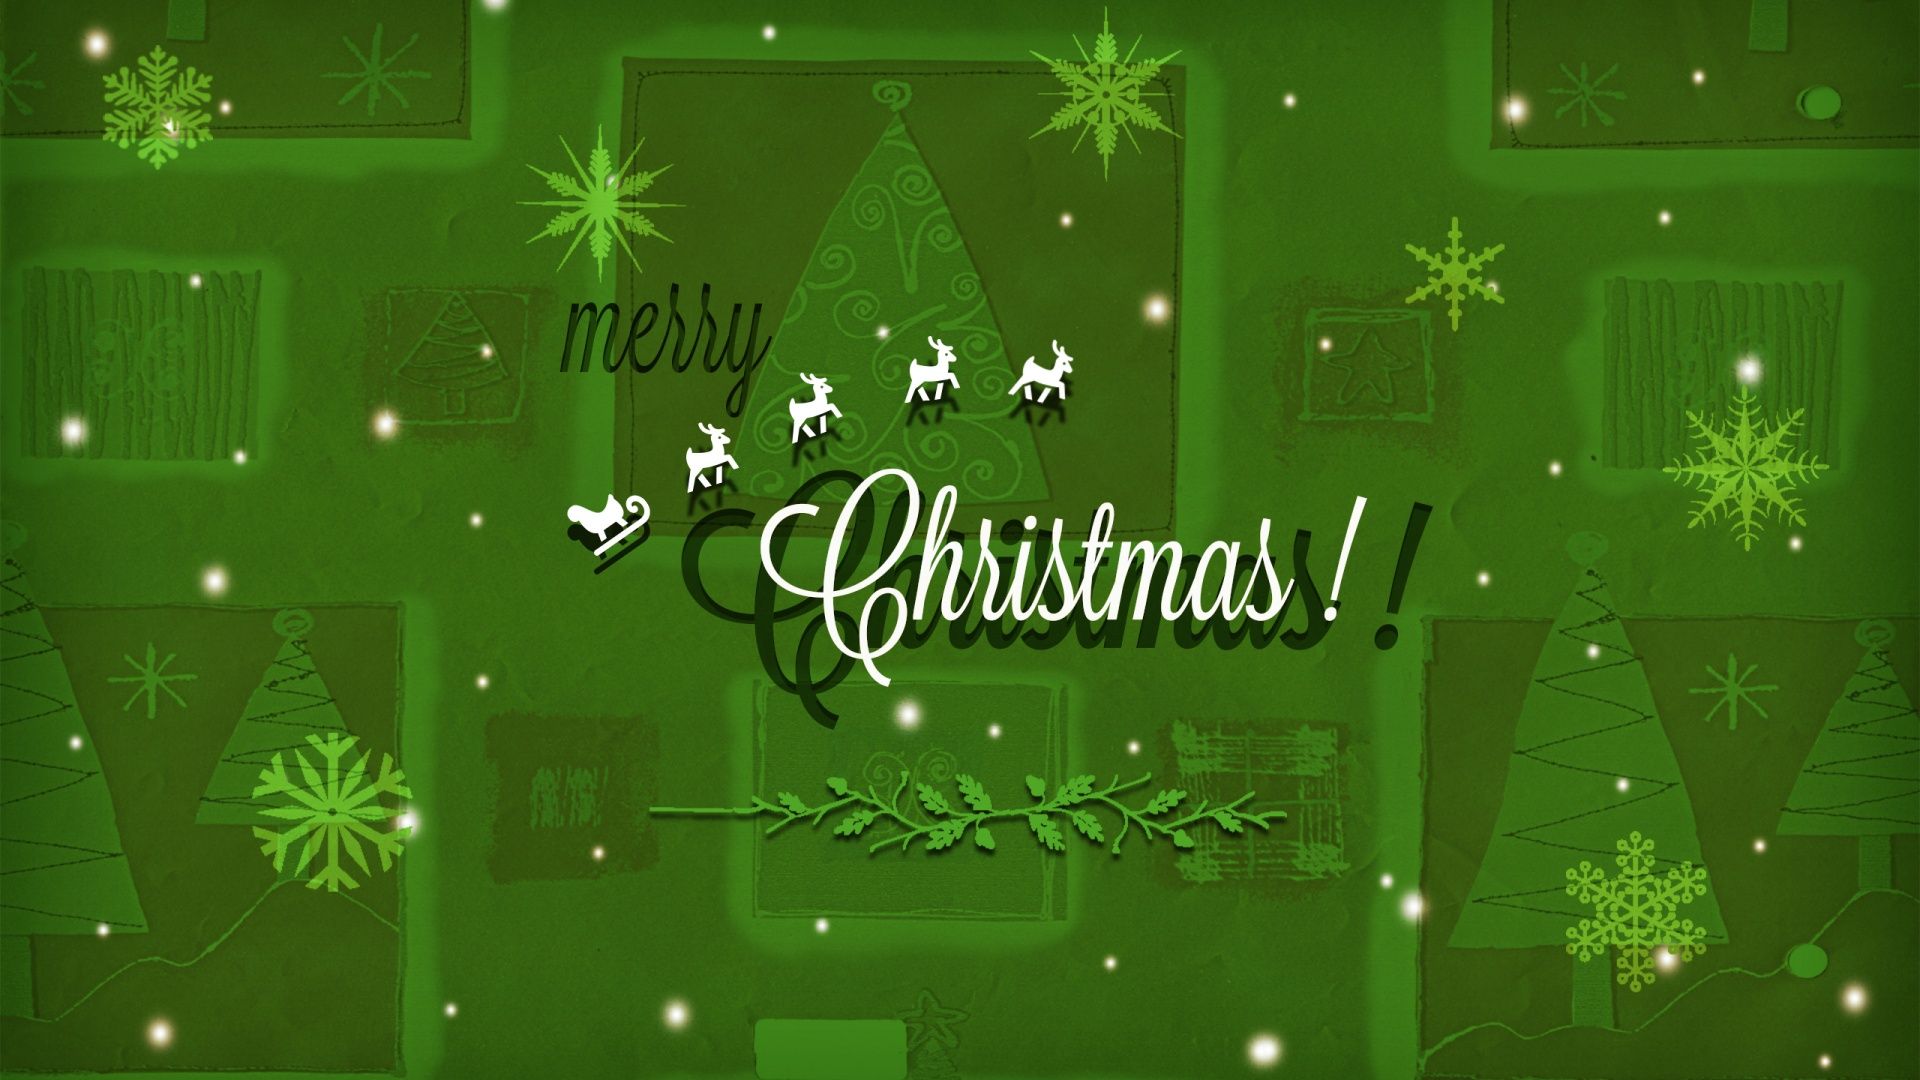 Merry Christmas 2014 Wallpapers HD Backgrounds